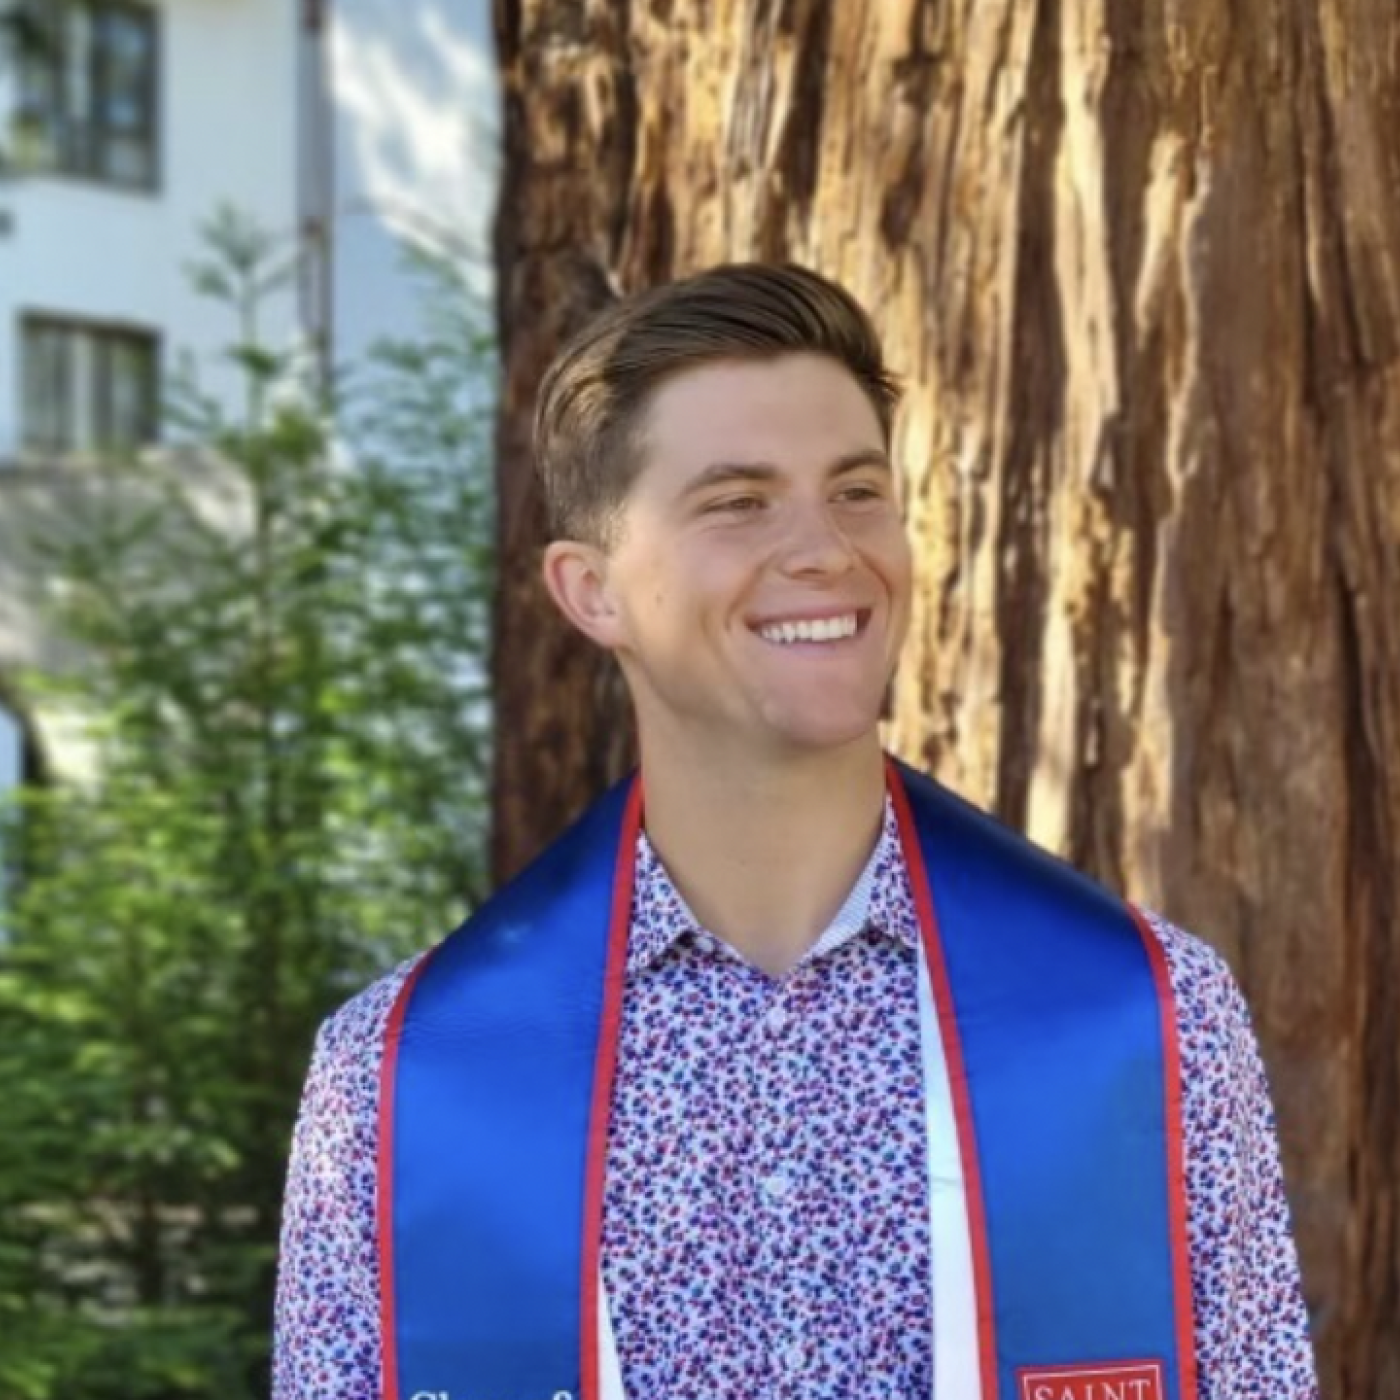 A finance degree student posing with a graduation stole around his neck